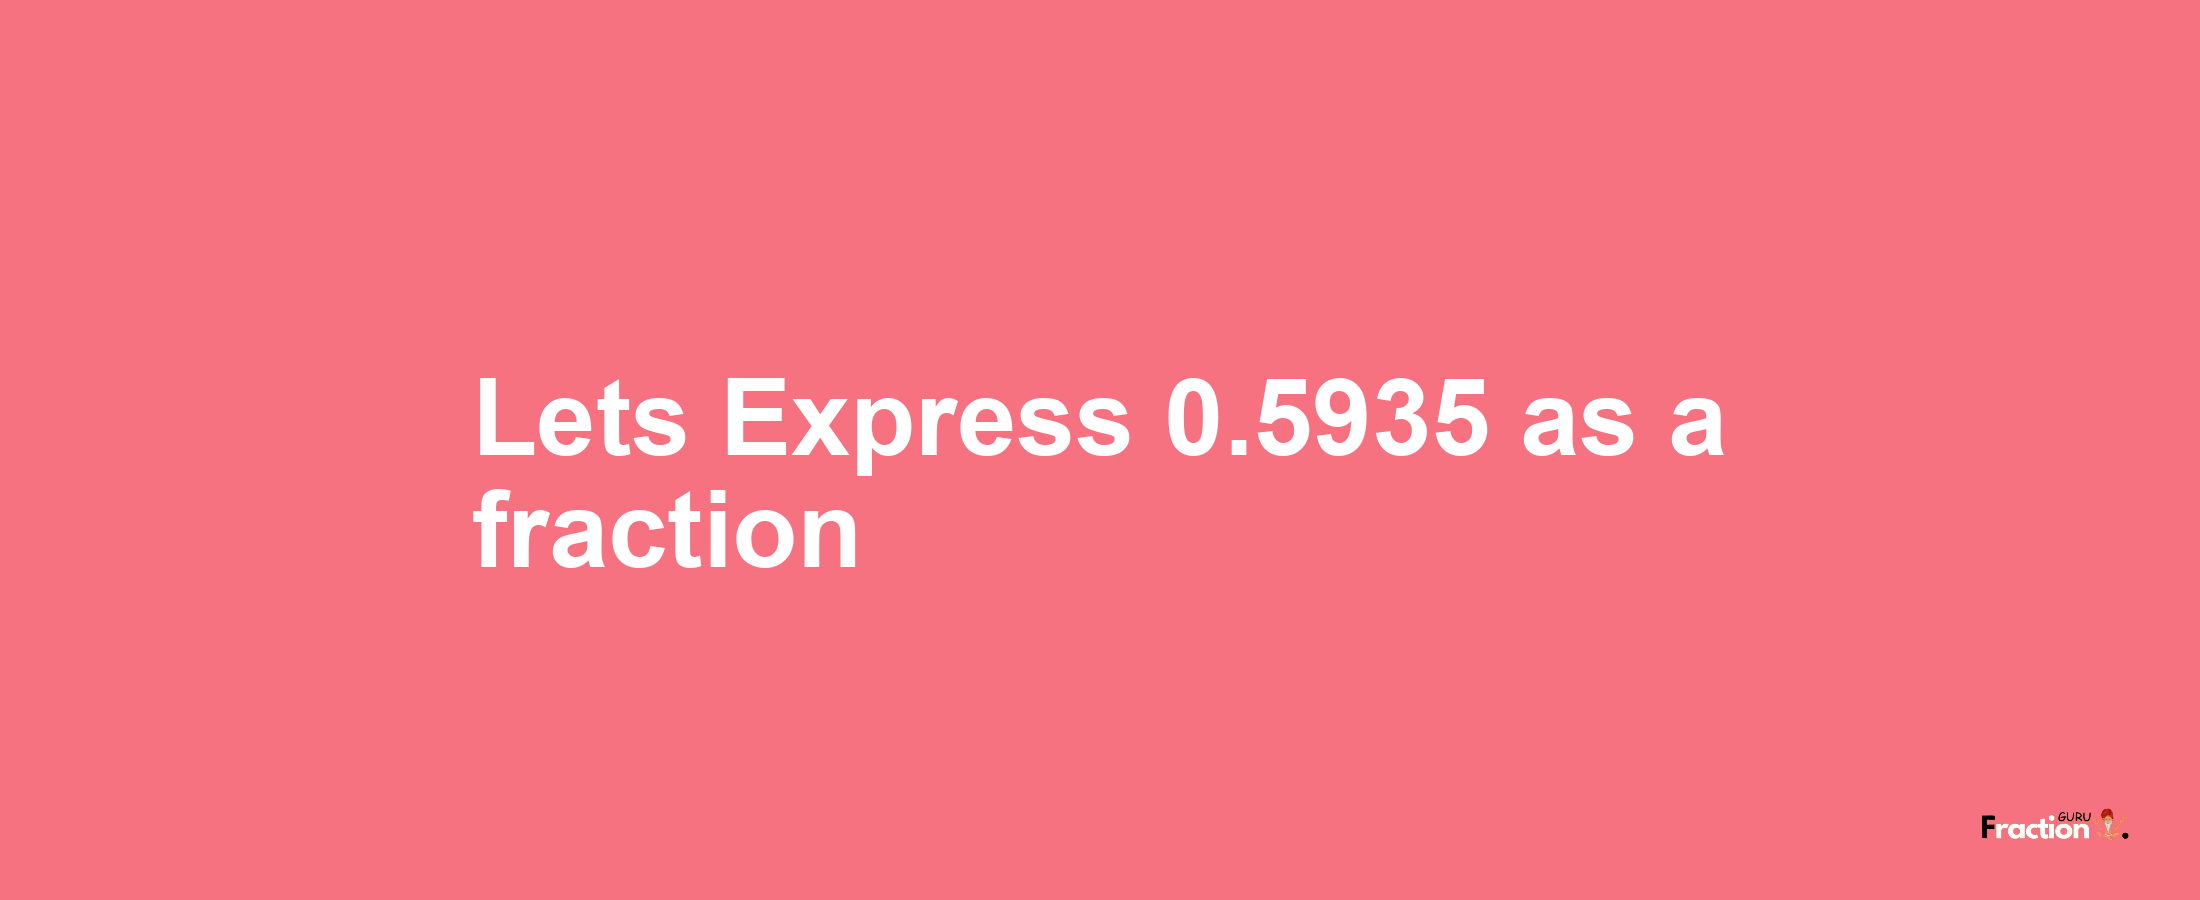 Lets Express 0.5935 as afraction